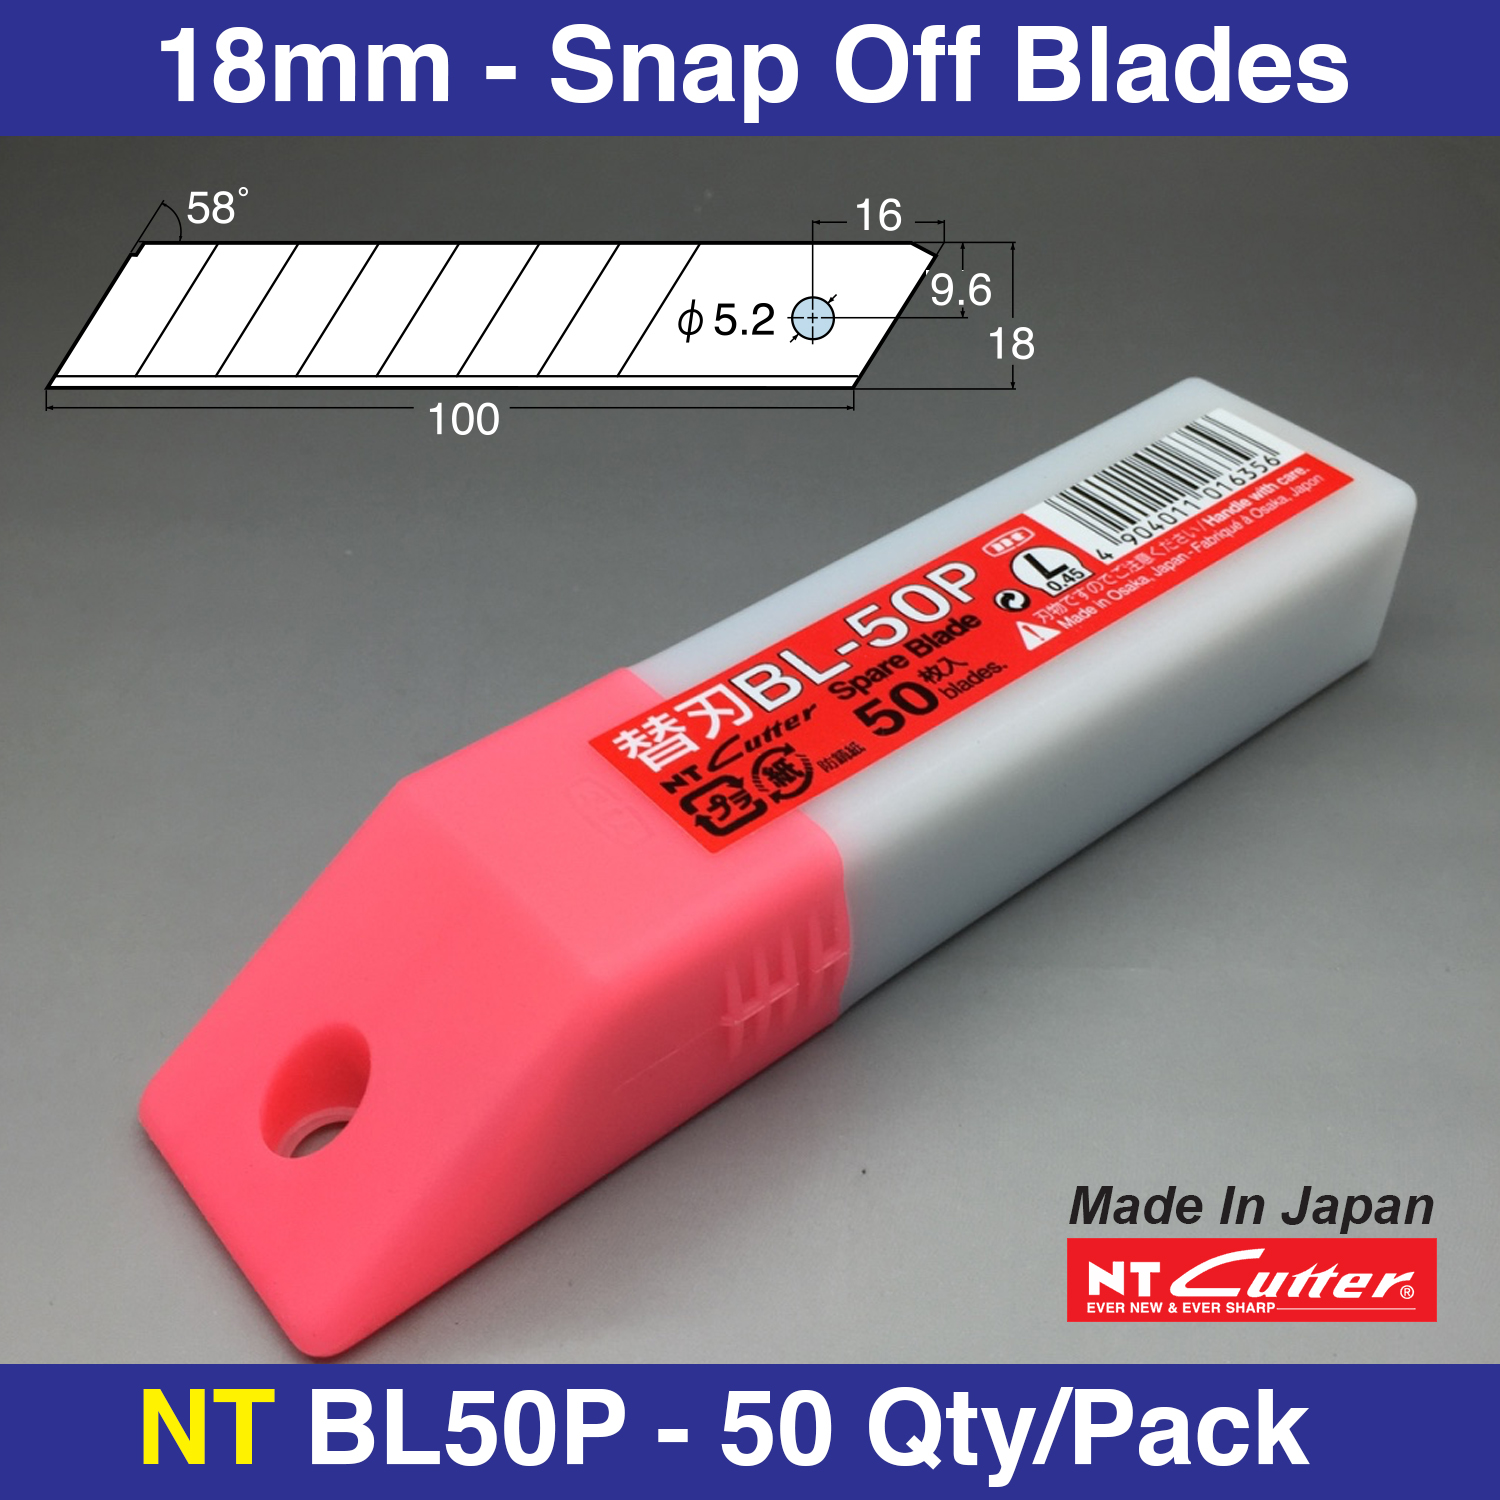 NT Cutter 18mm Heavy-Duty Snap-Off Blades, 50-Blade / Pack, 1 Pack